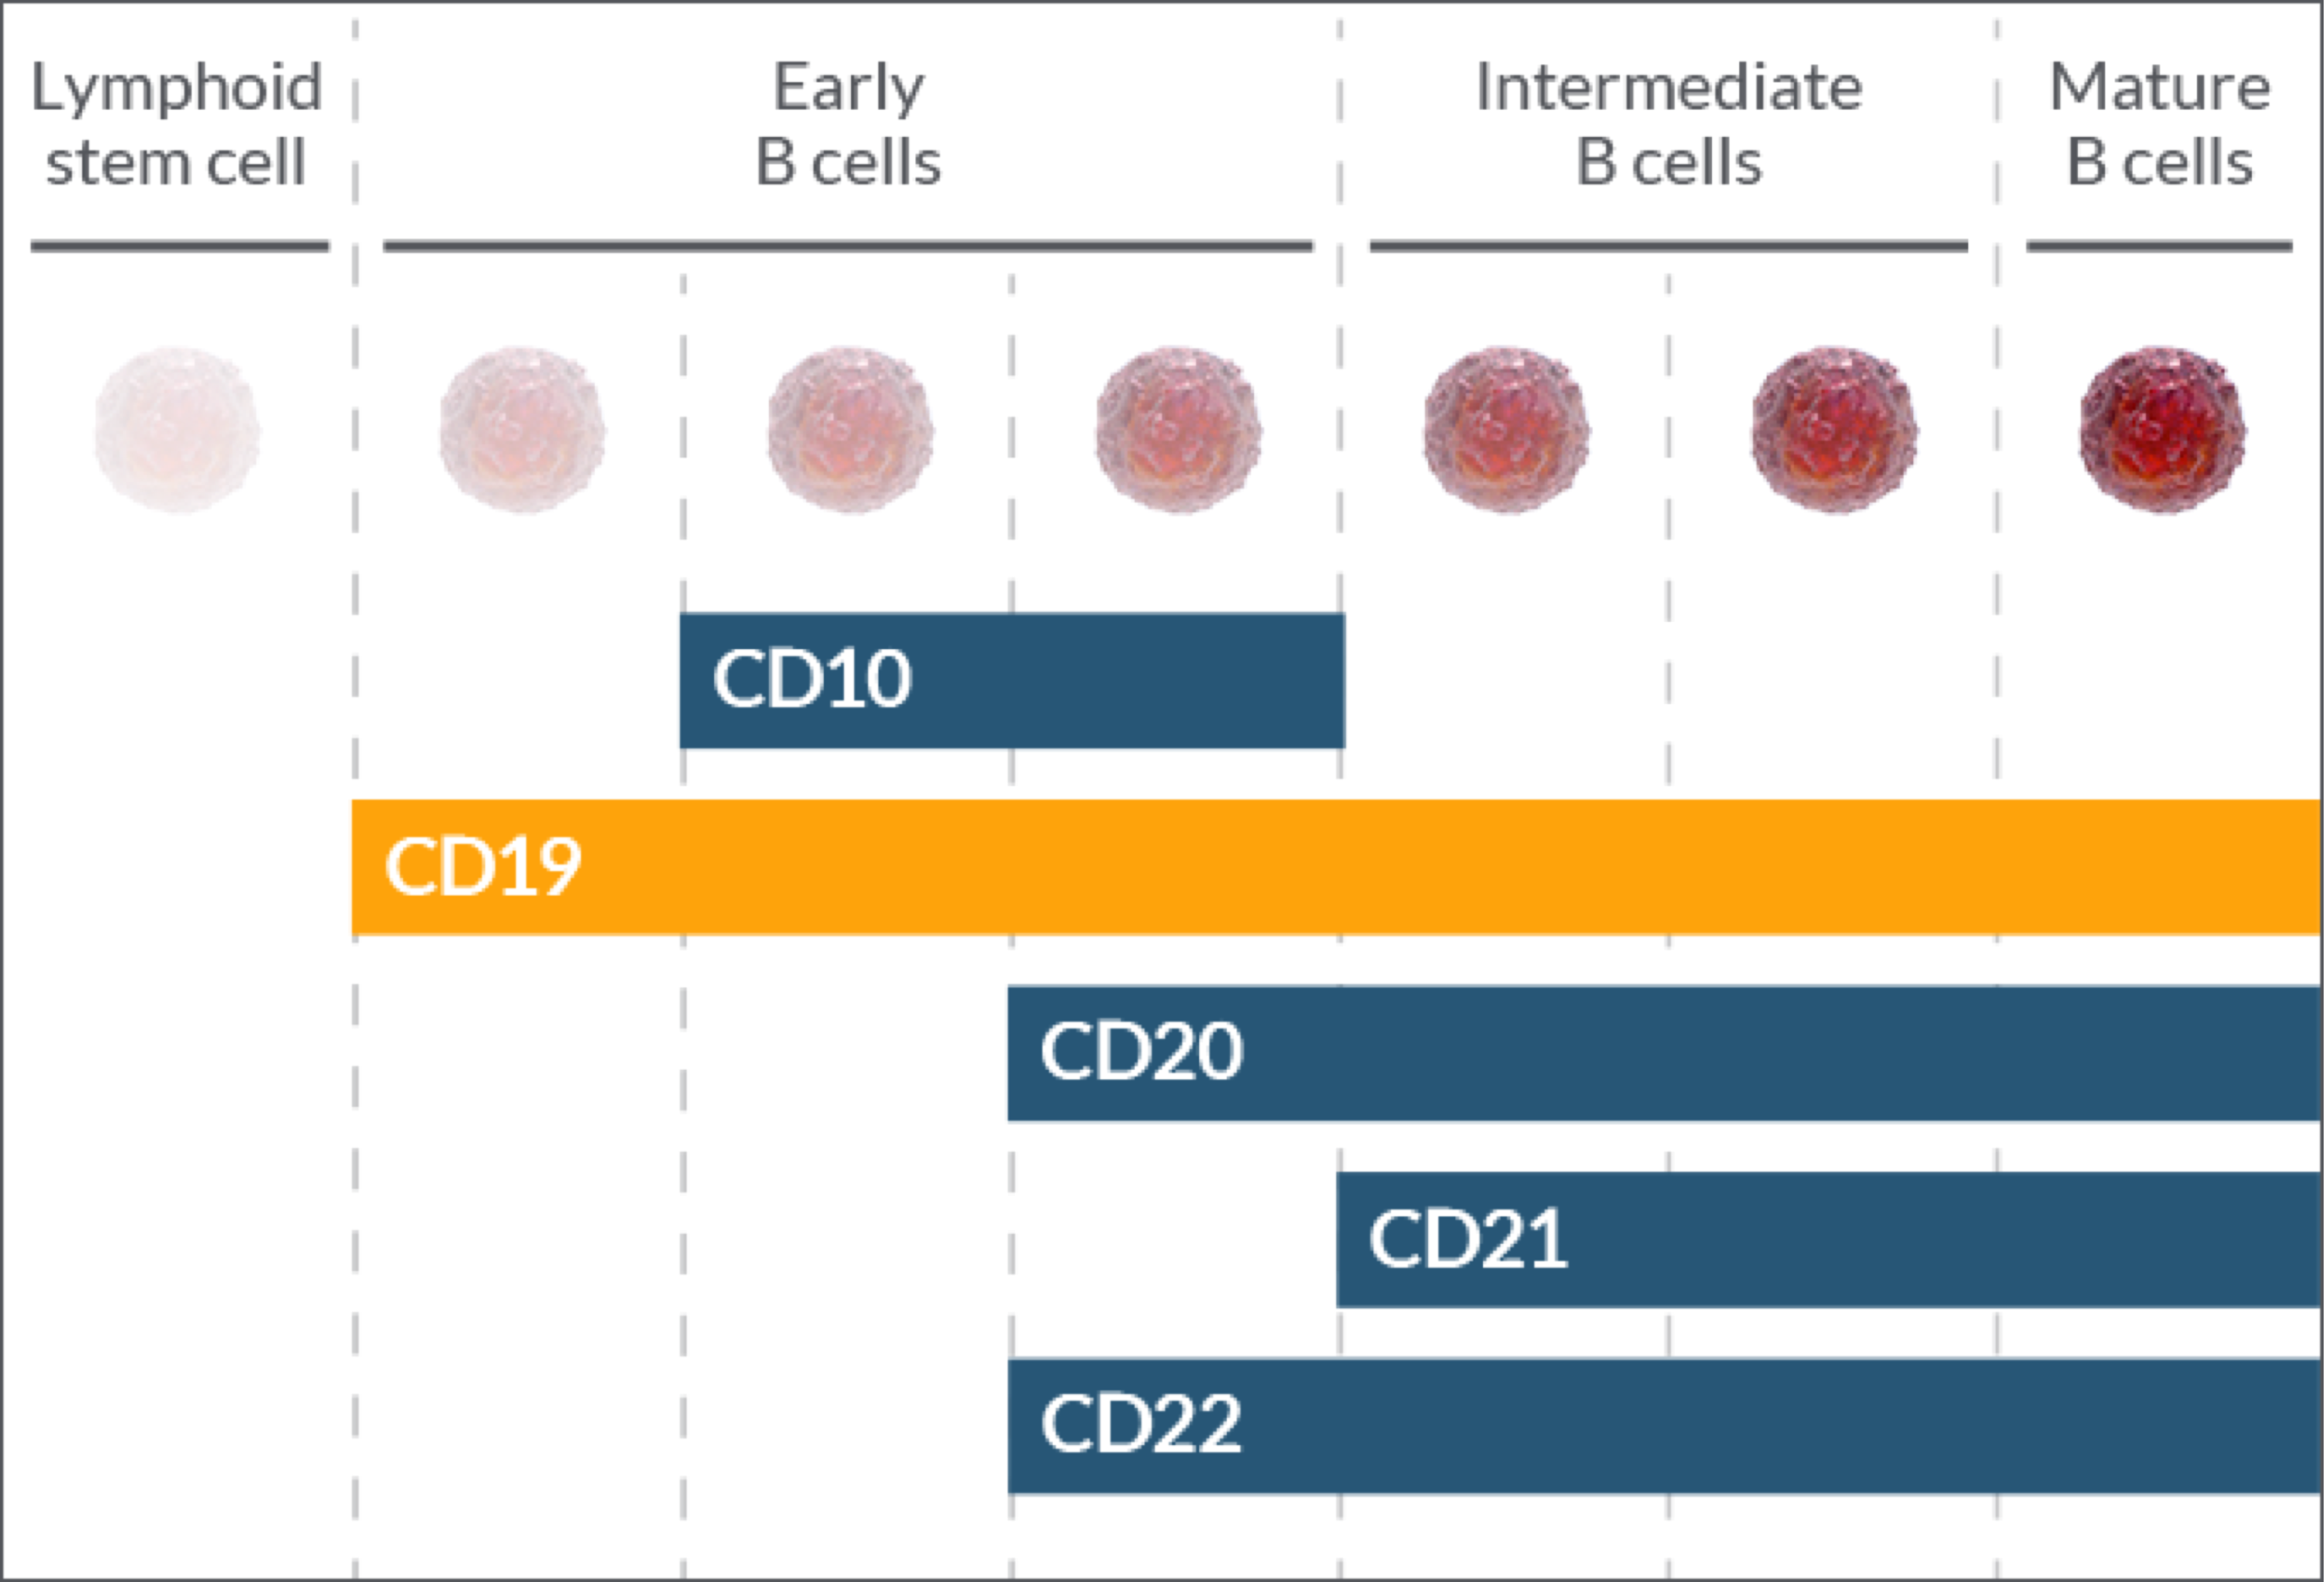 CD19 is ubiquitously expressed in B-lineage ALL